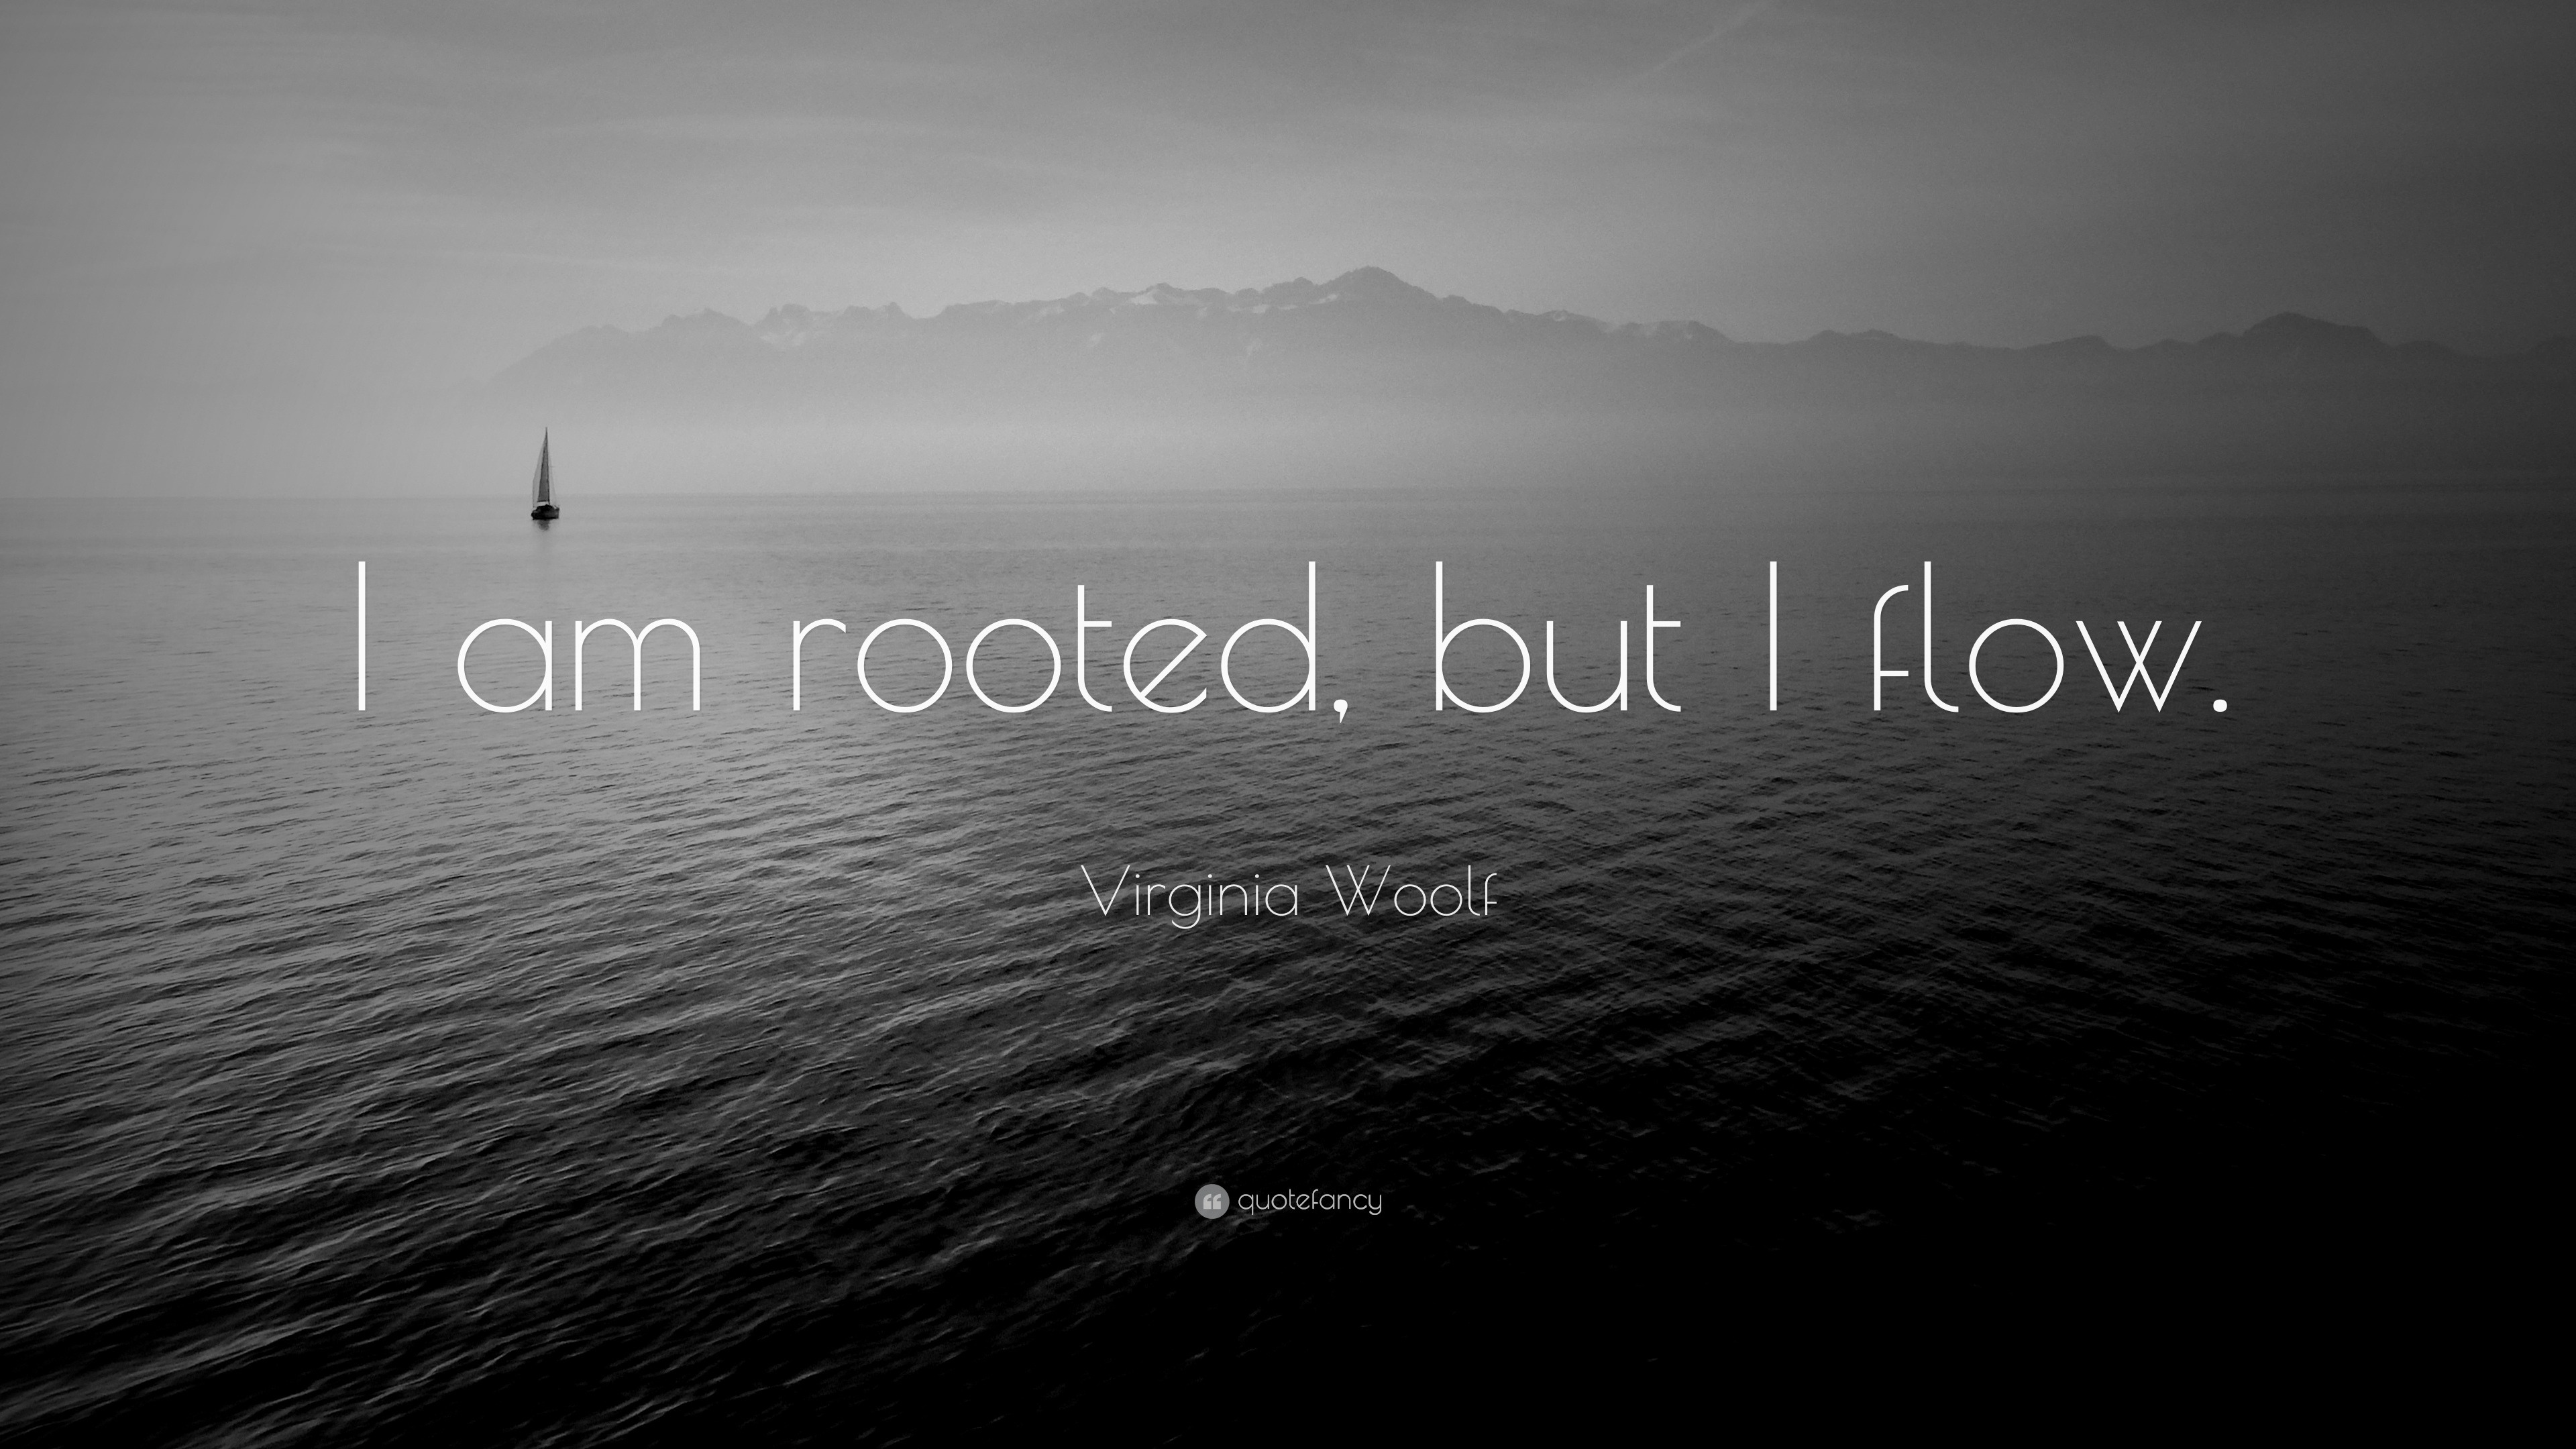 https://quotefancy.com/media/wallpaper/3840x2160/11678-Virginia-Woolf-Quote-I-am-rooted-but-I-flow.jpg